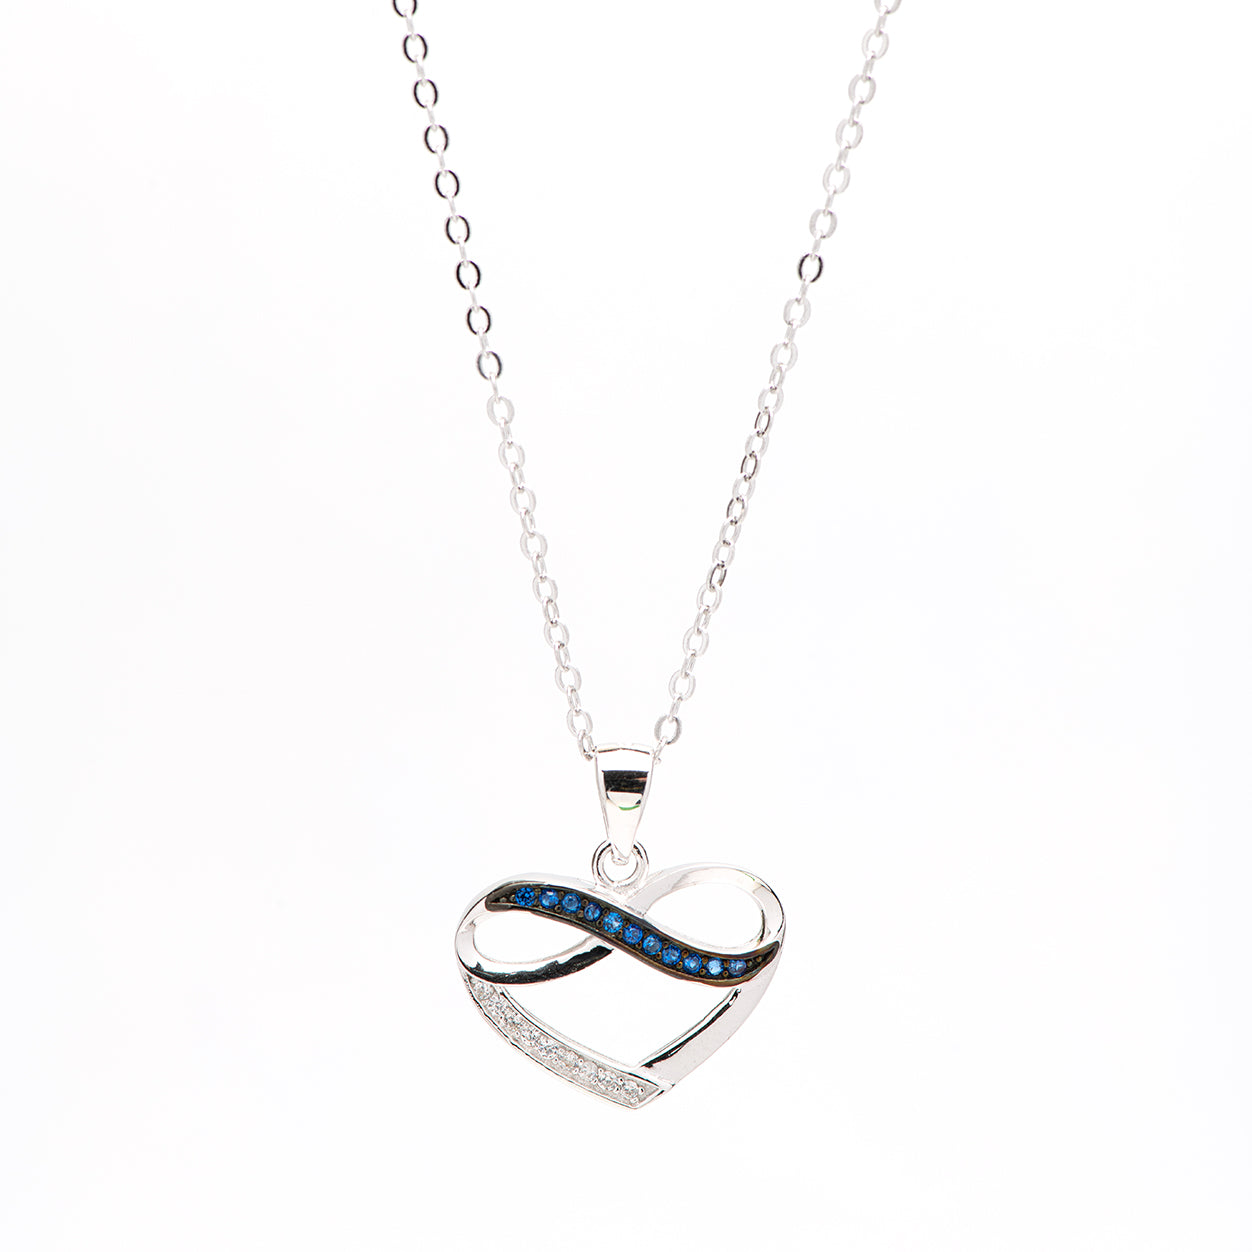 DK-925-459 -heart with infinity necklace